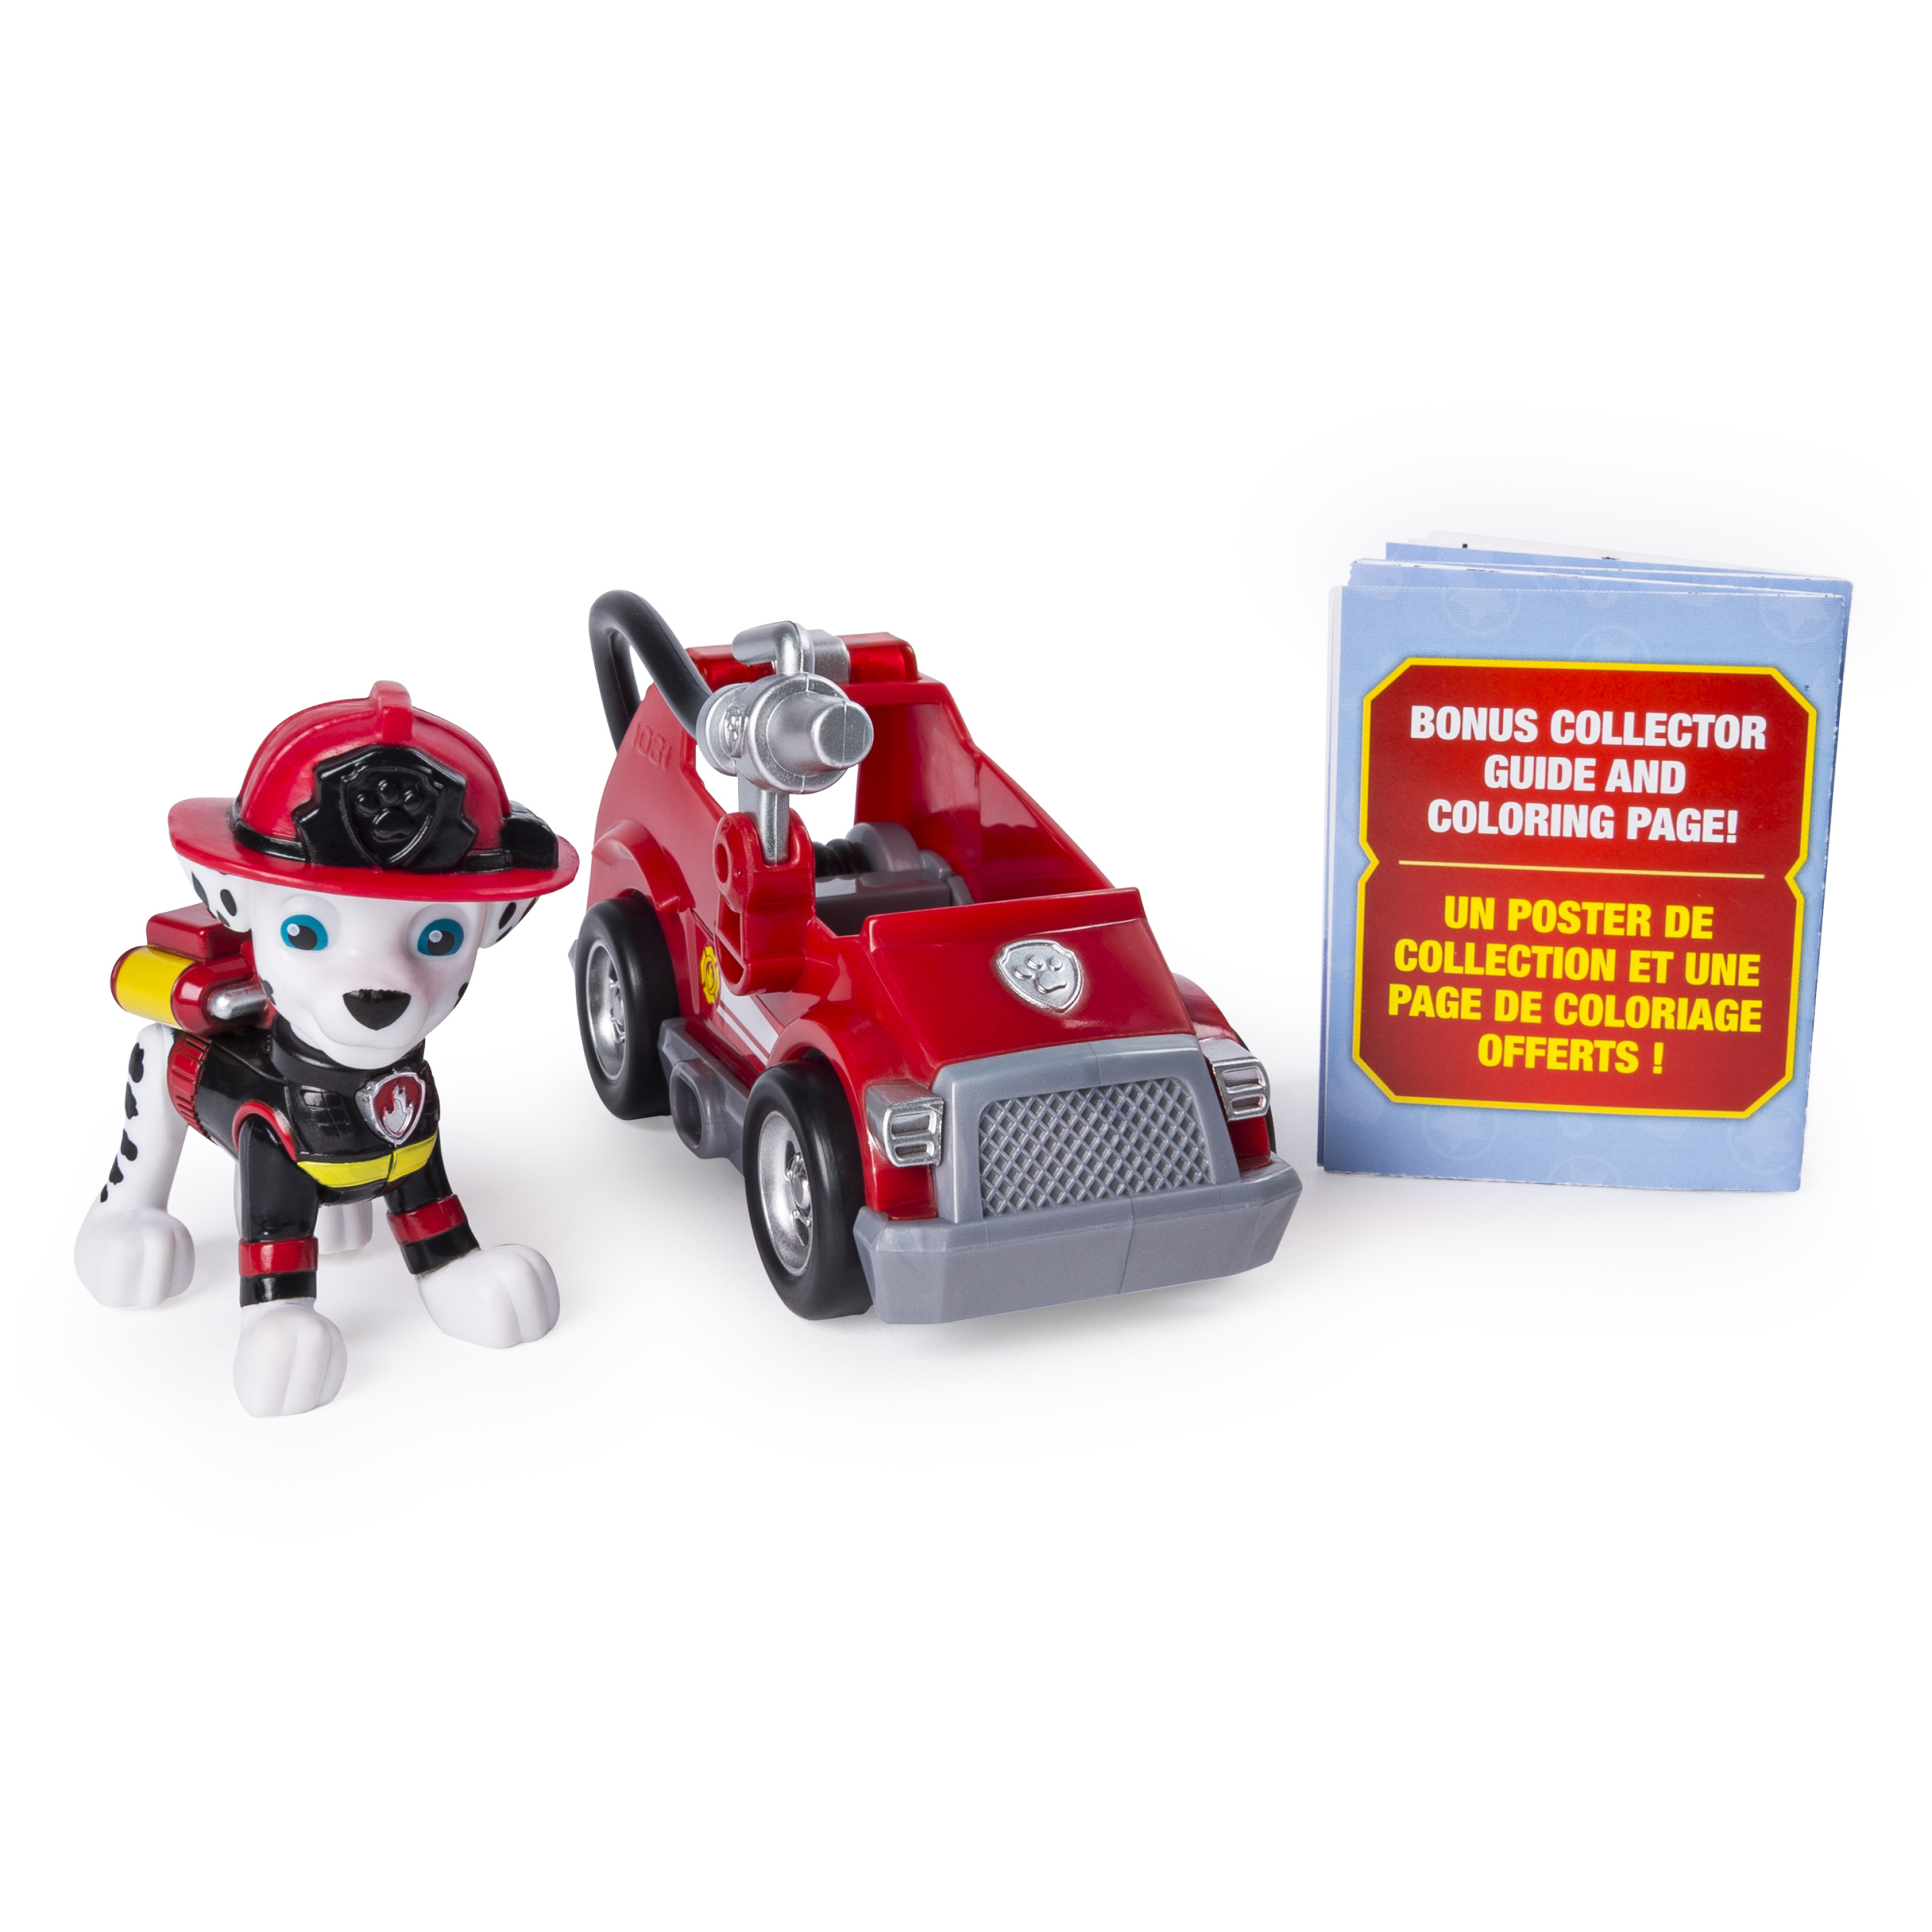 PAW Patrol Ultimate Rescue, Marshall’s Mini Fire Cart with Collectible Figure, for Ages 3 and Up - image 1 of 6